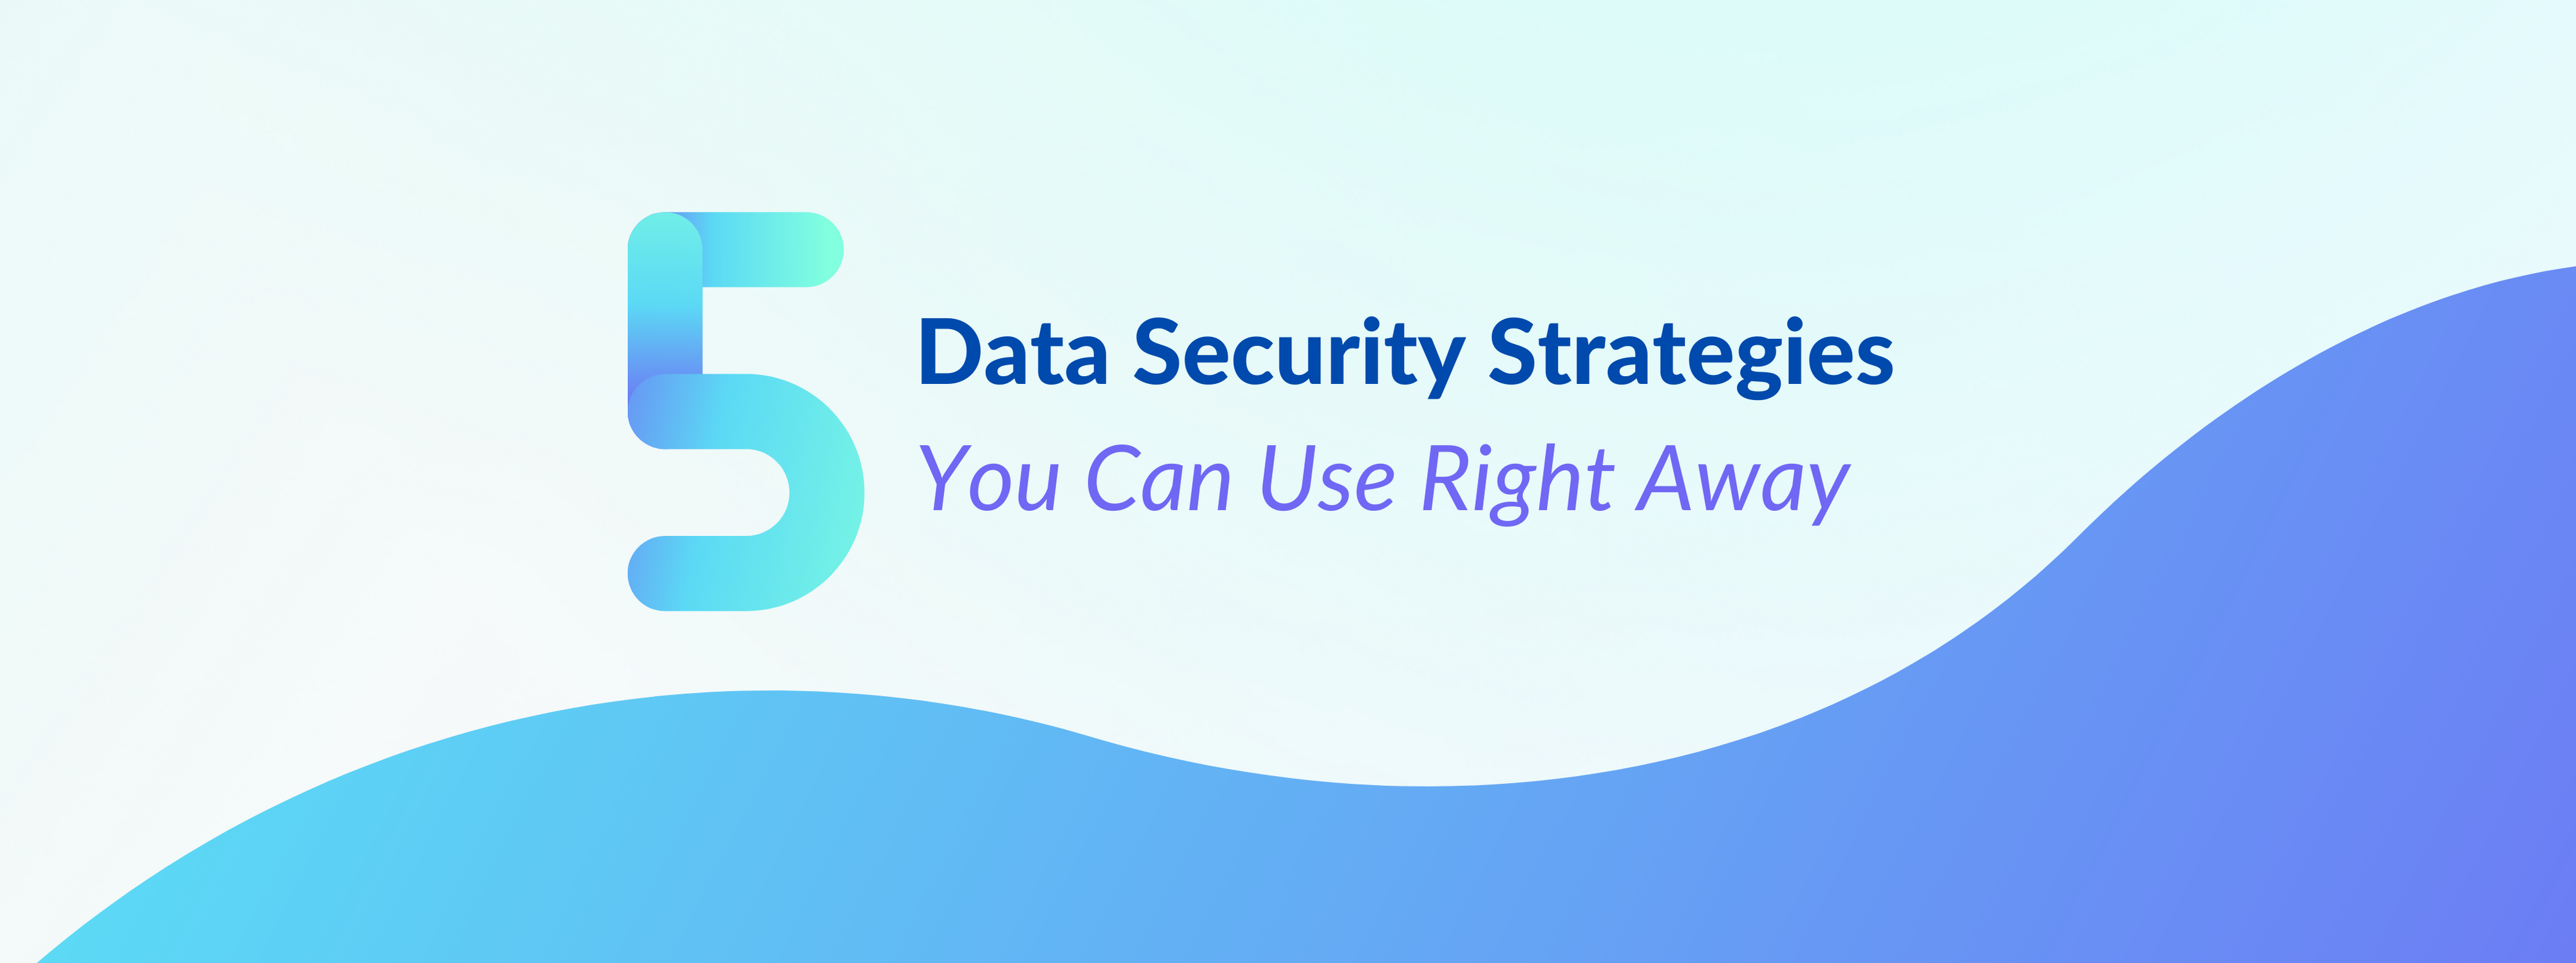 5 Data Security Strategies You Can Use Right Away